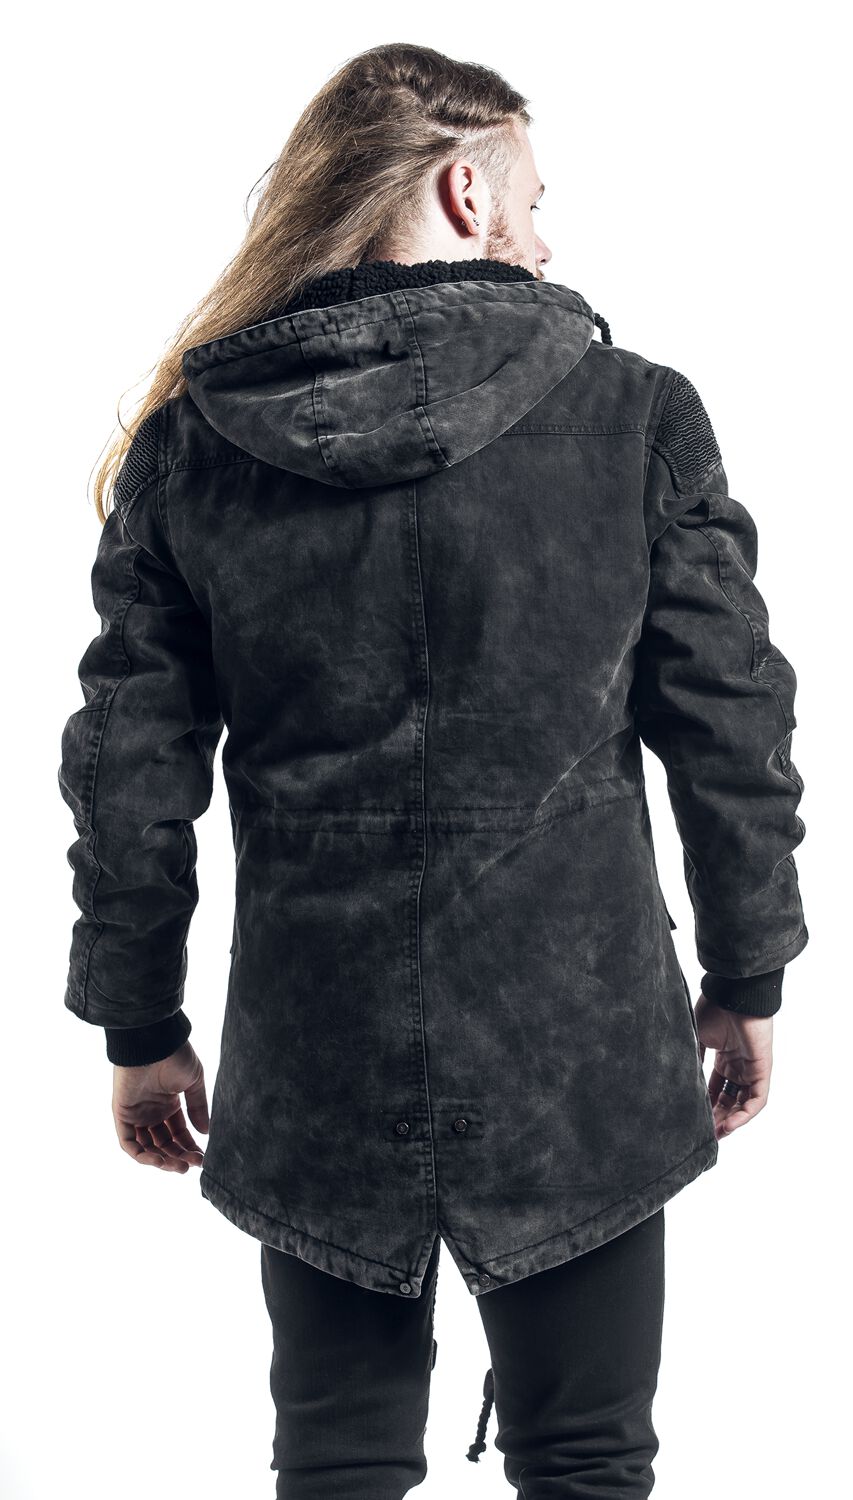 Camouflage Jacket with Embroidery, Rock Rebel by EMP Between-seasons Jacket